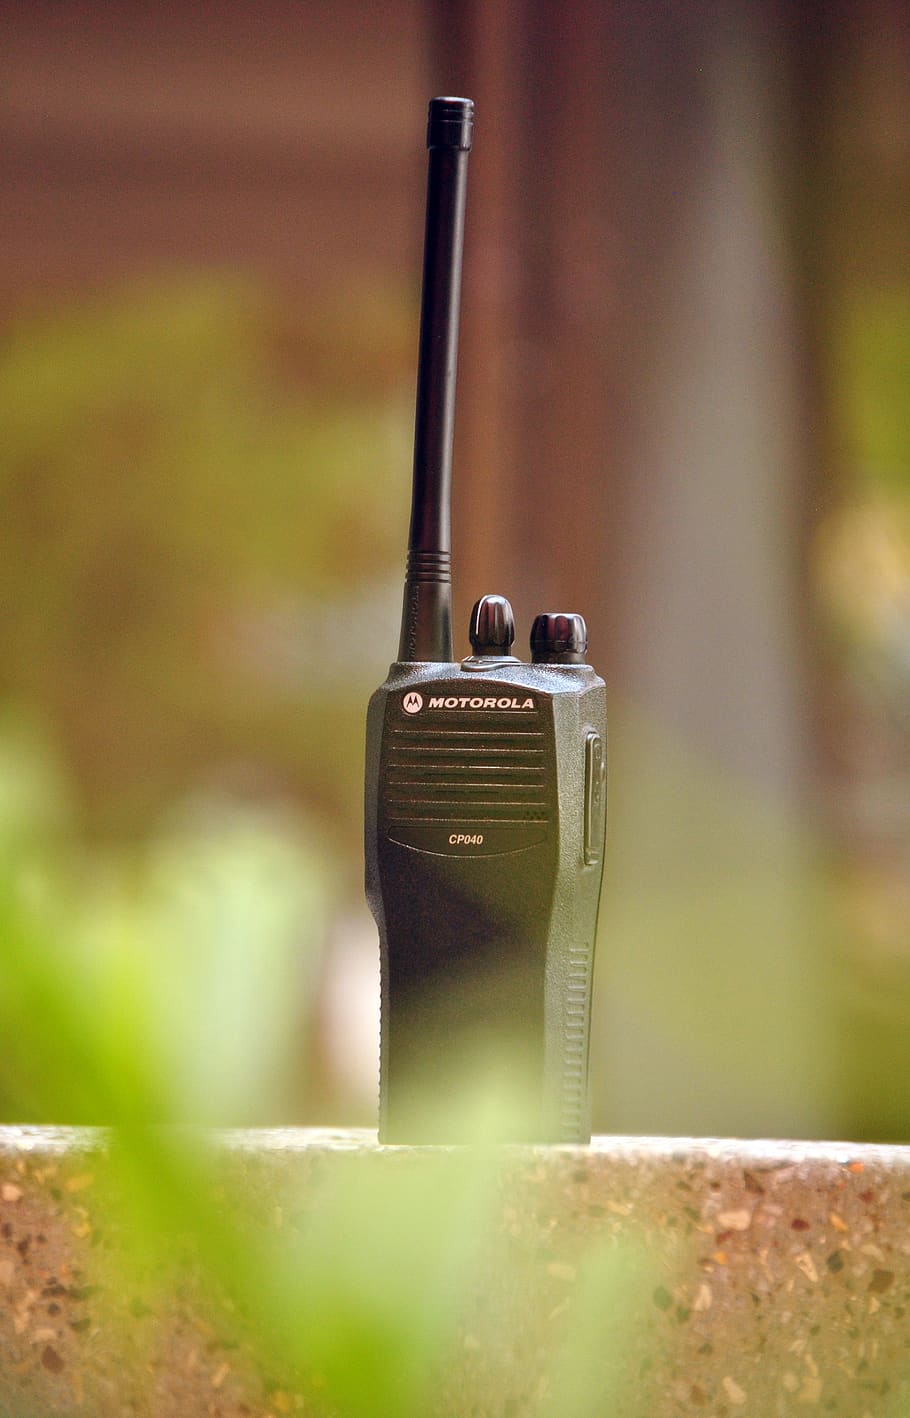 walky talky, communication, phone, technology, wireless, focus on foreground, close-up, metal, day, still life